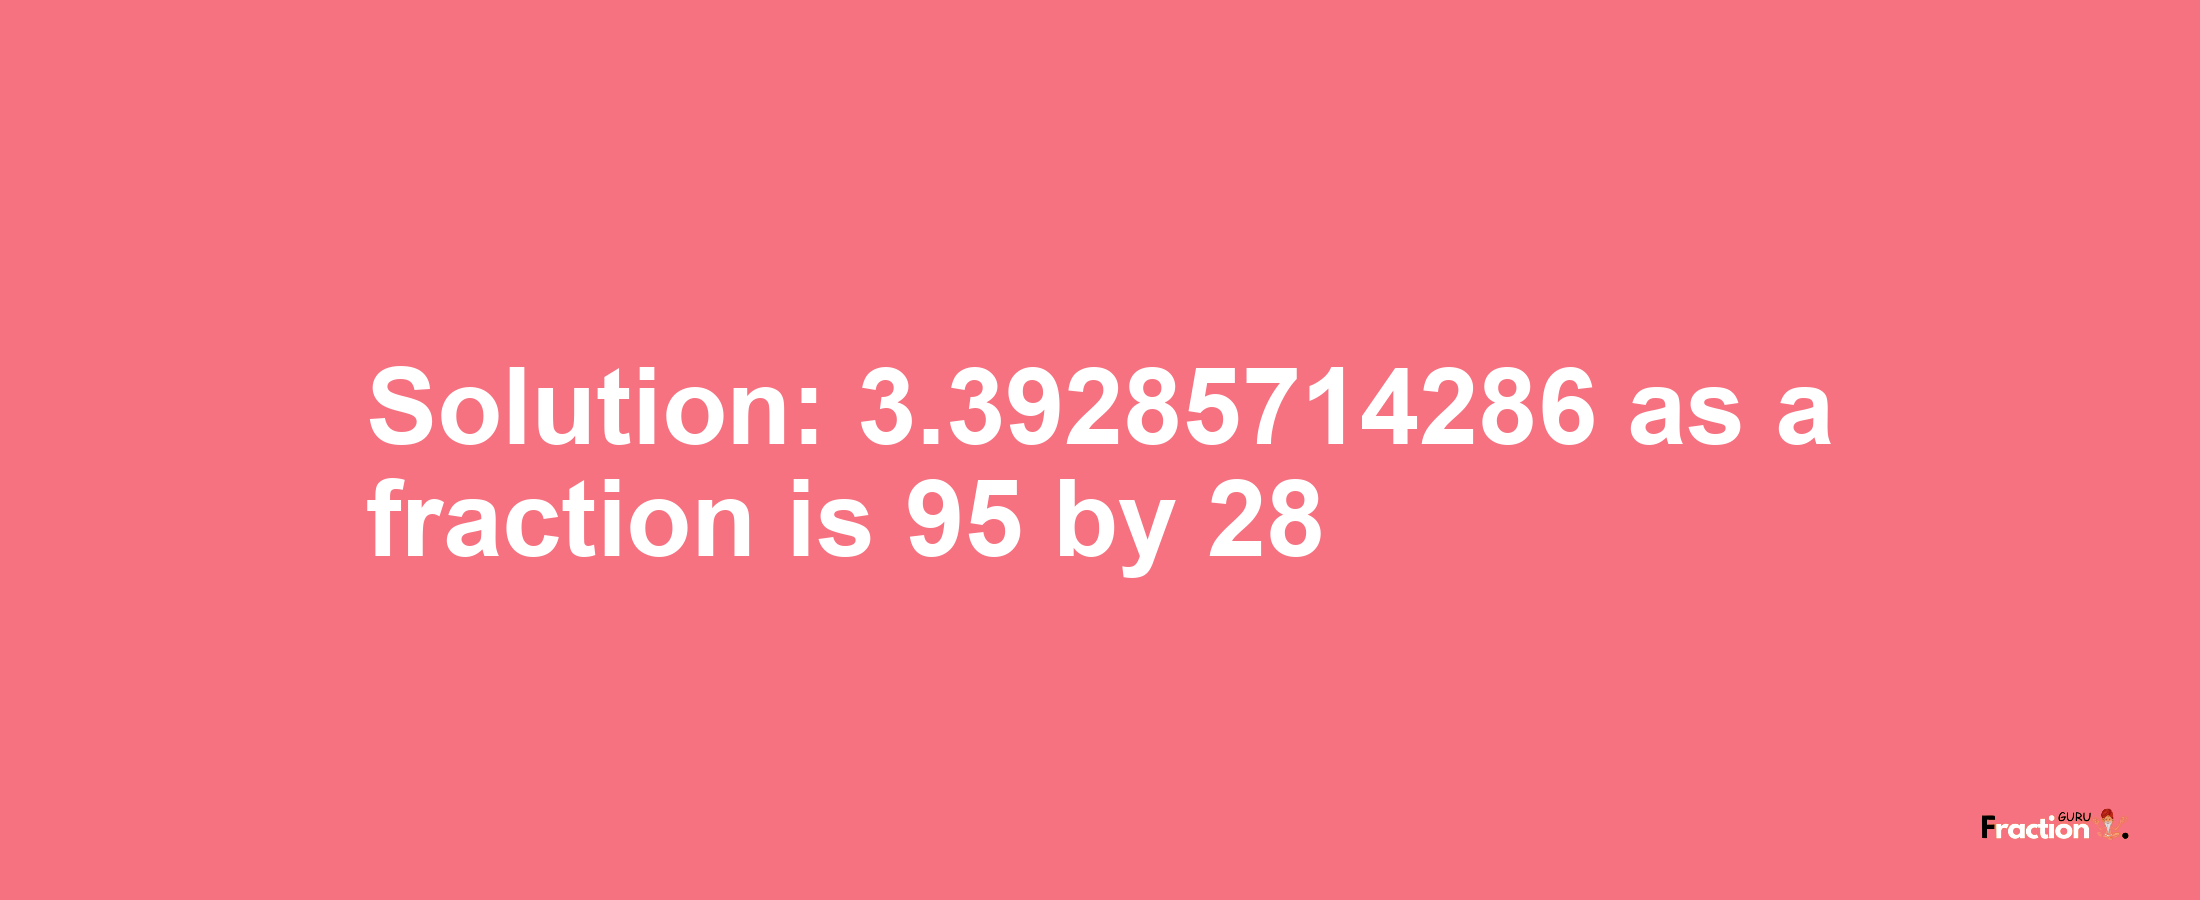 Solution:3.39285714286 as a fraction is 95/28